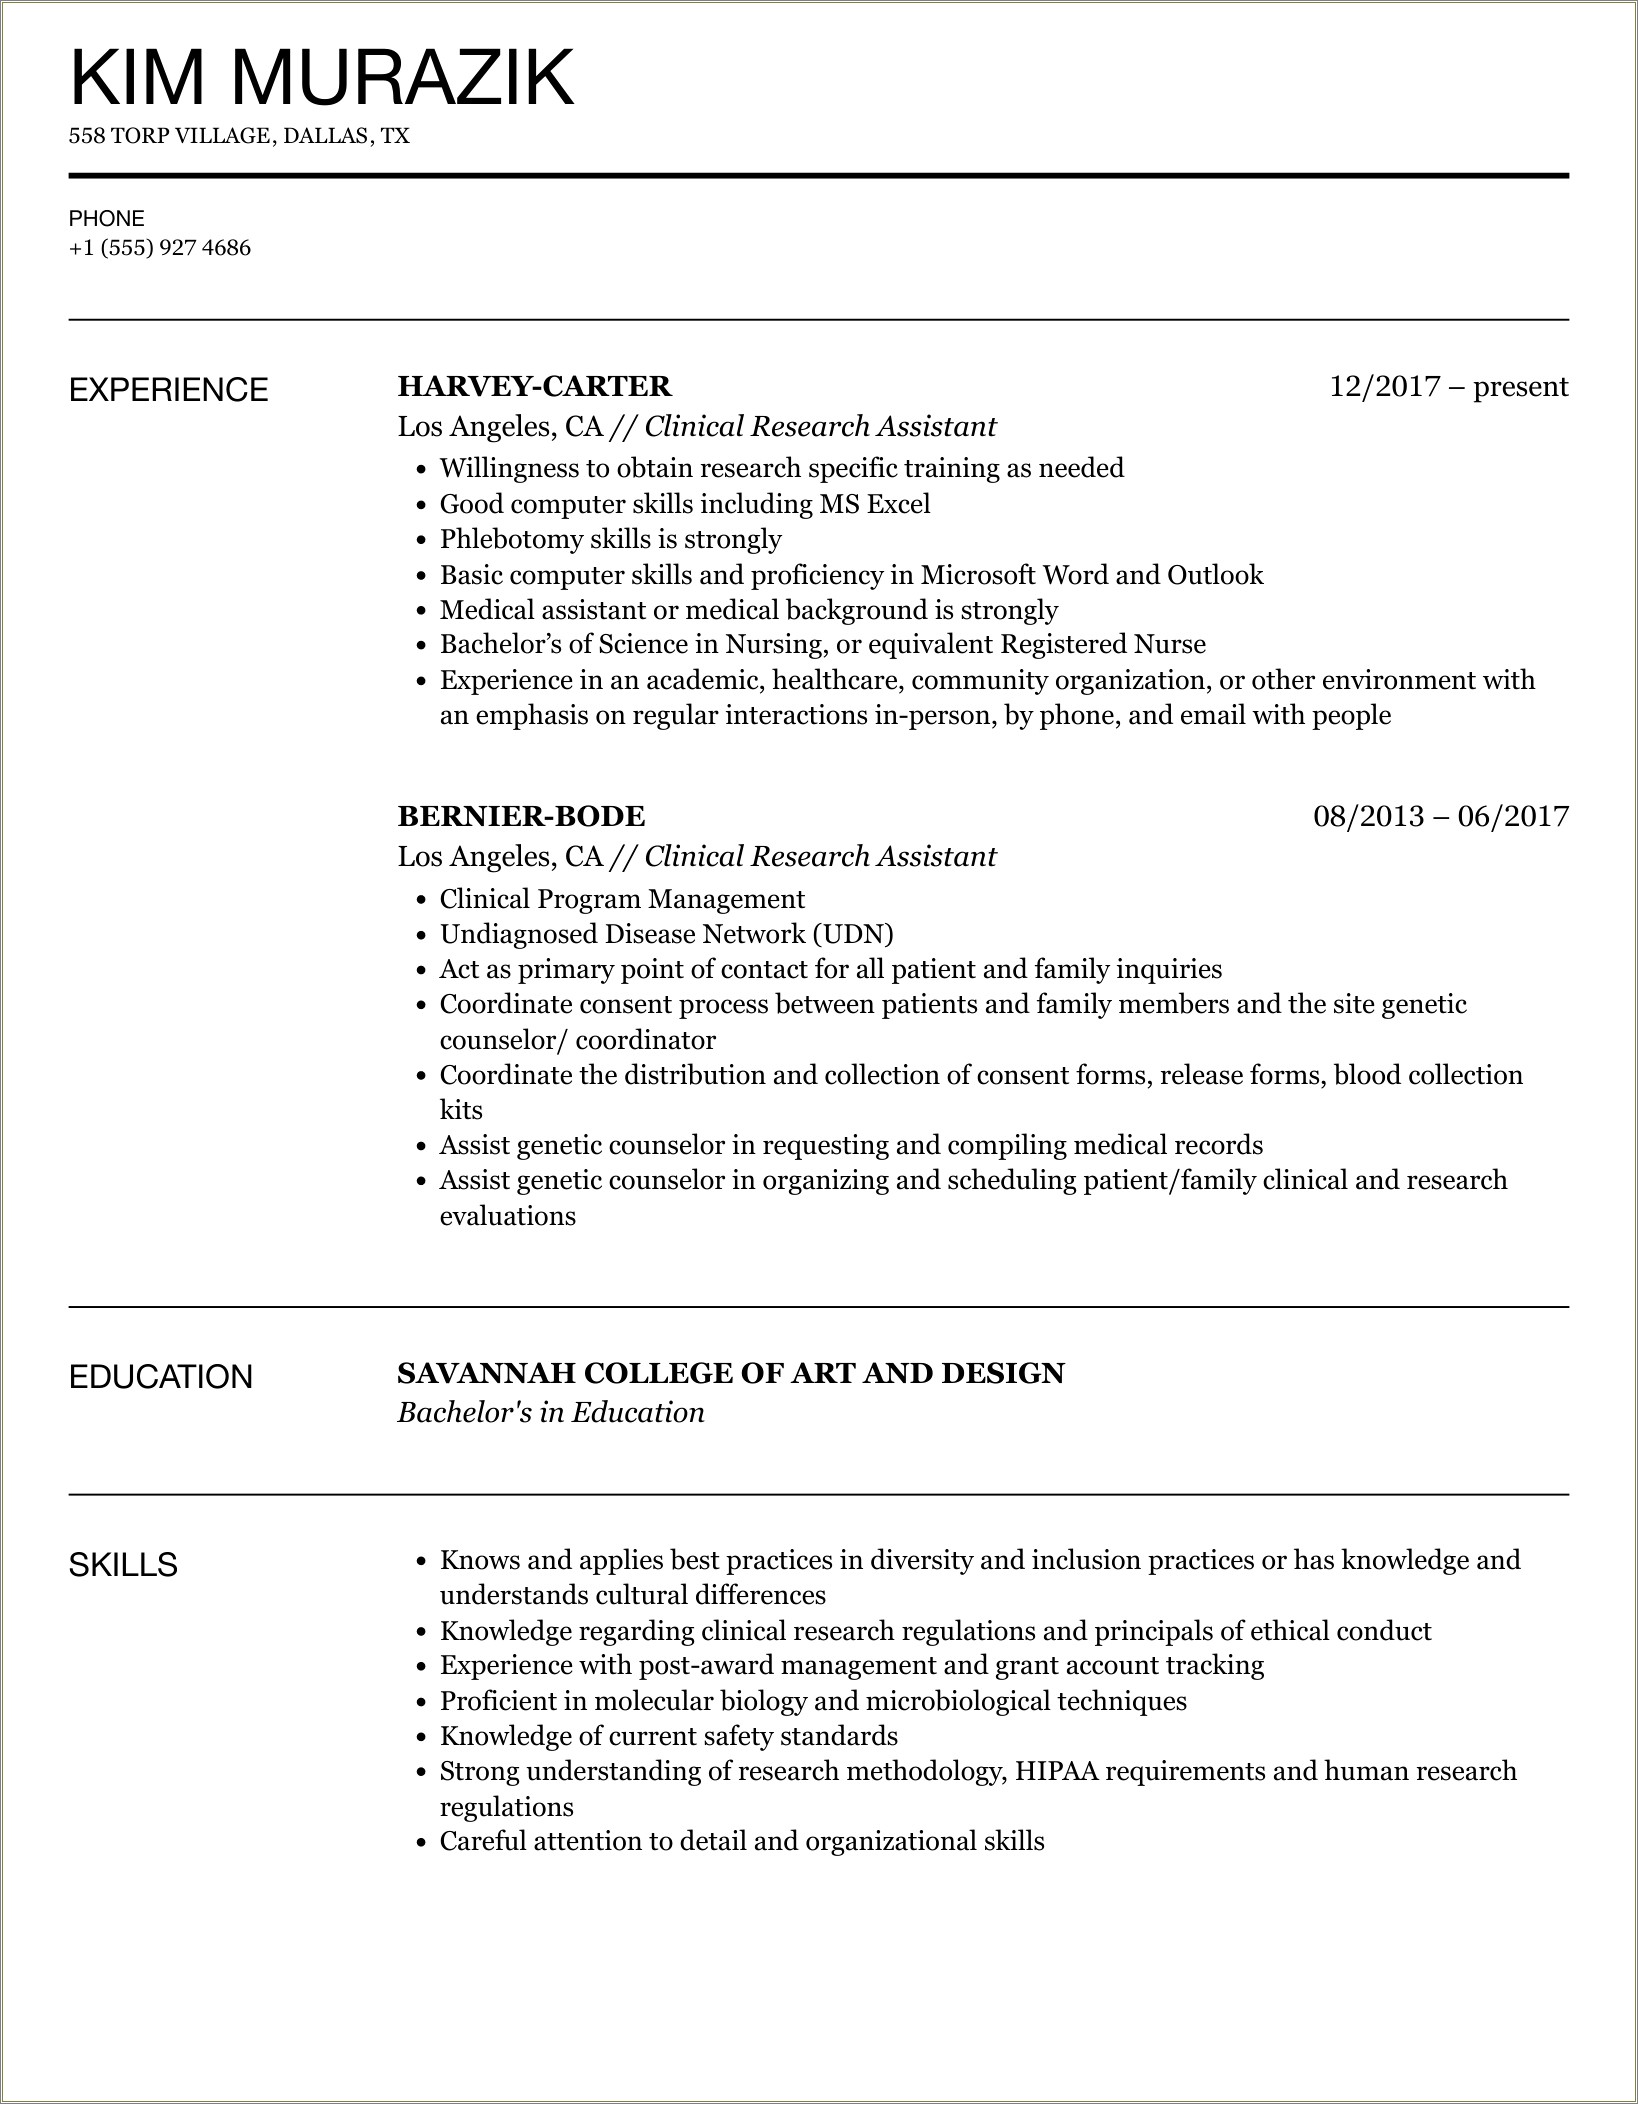 Clinical Research Assistant Job Resume Samples